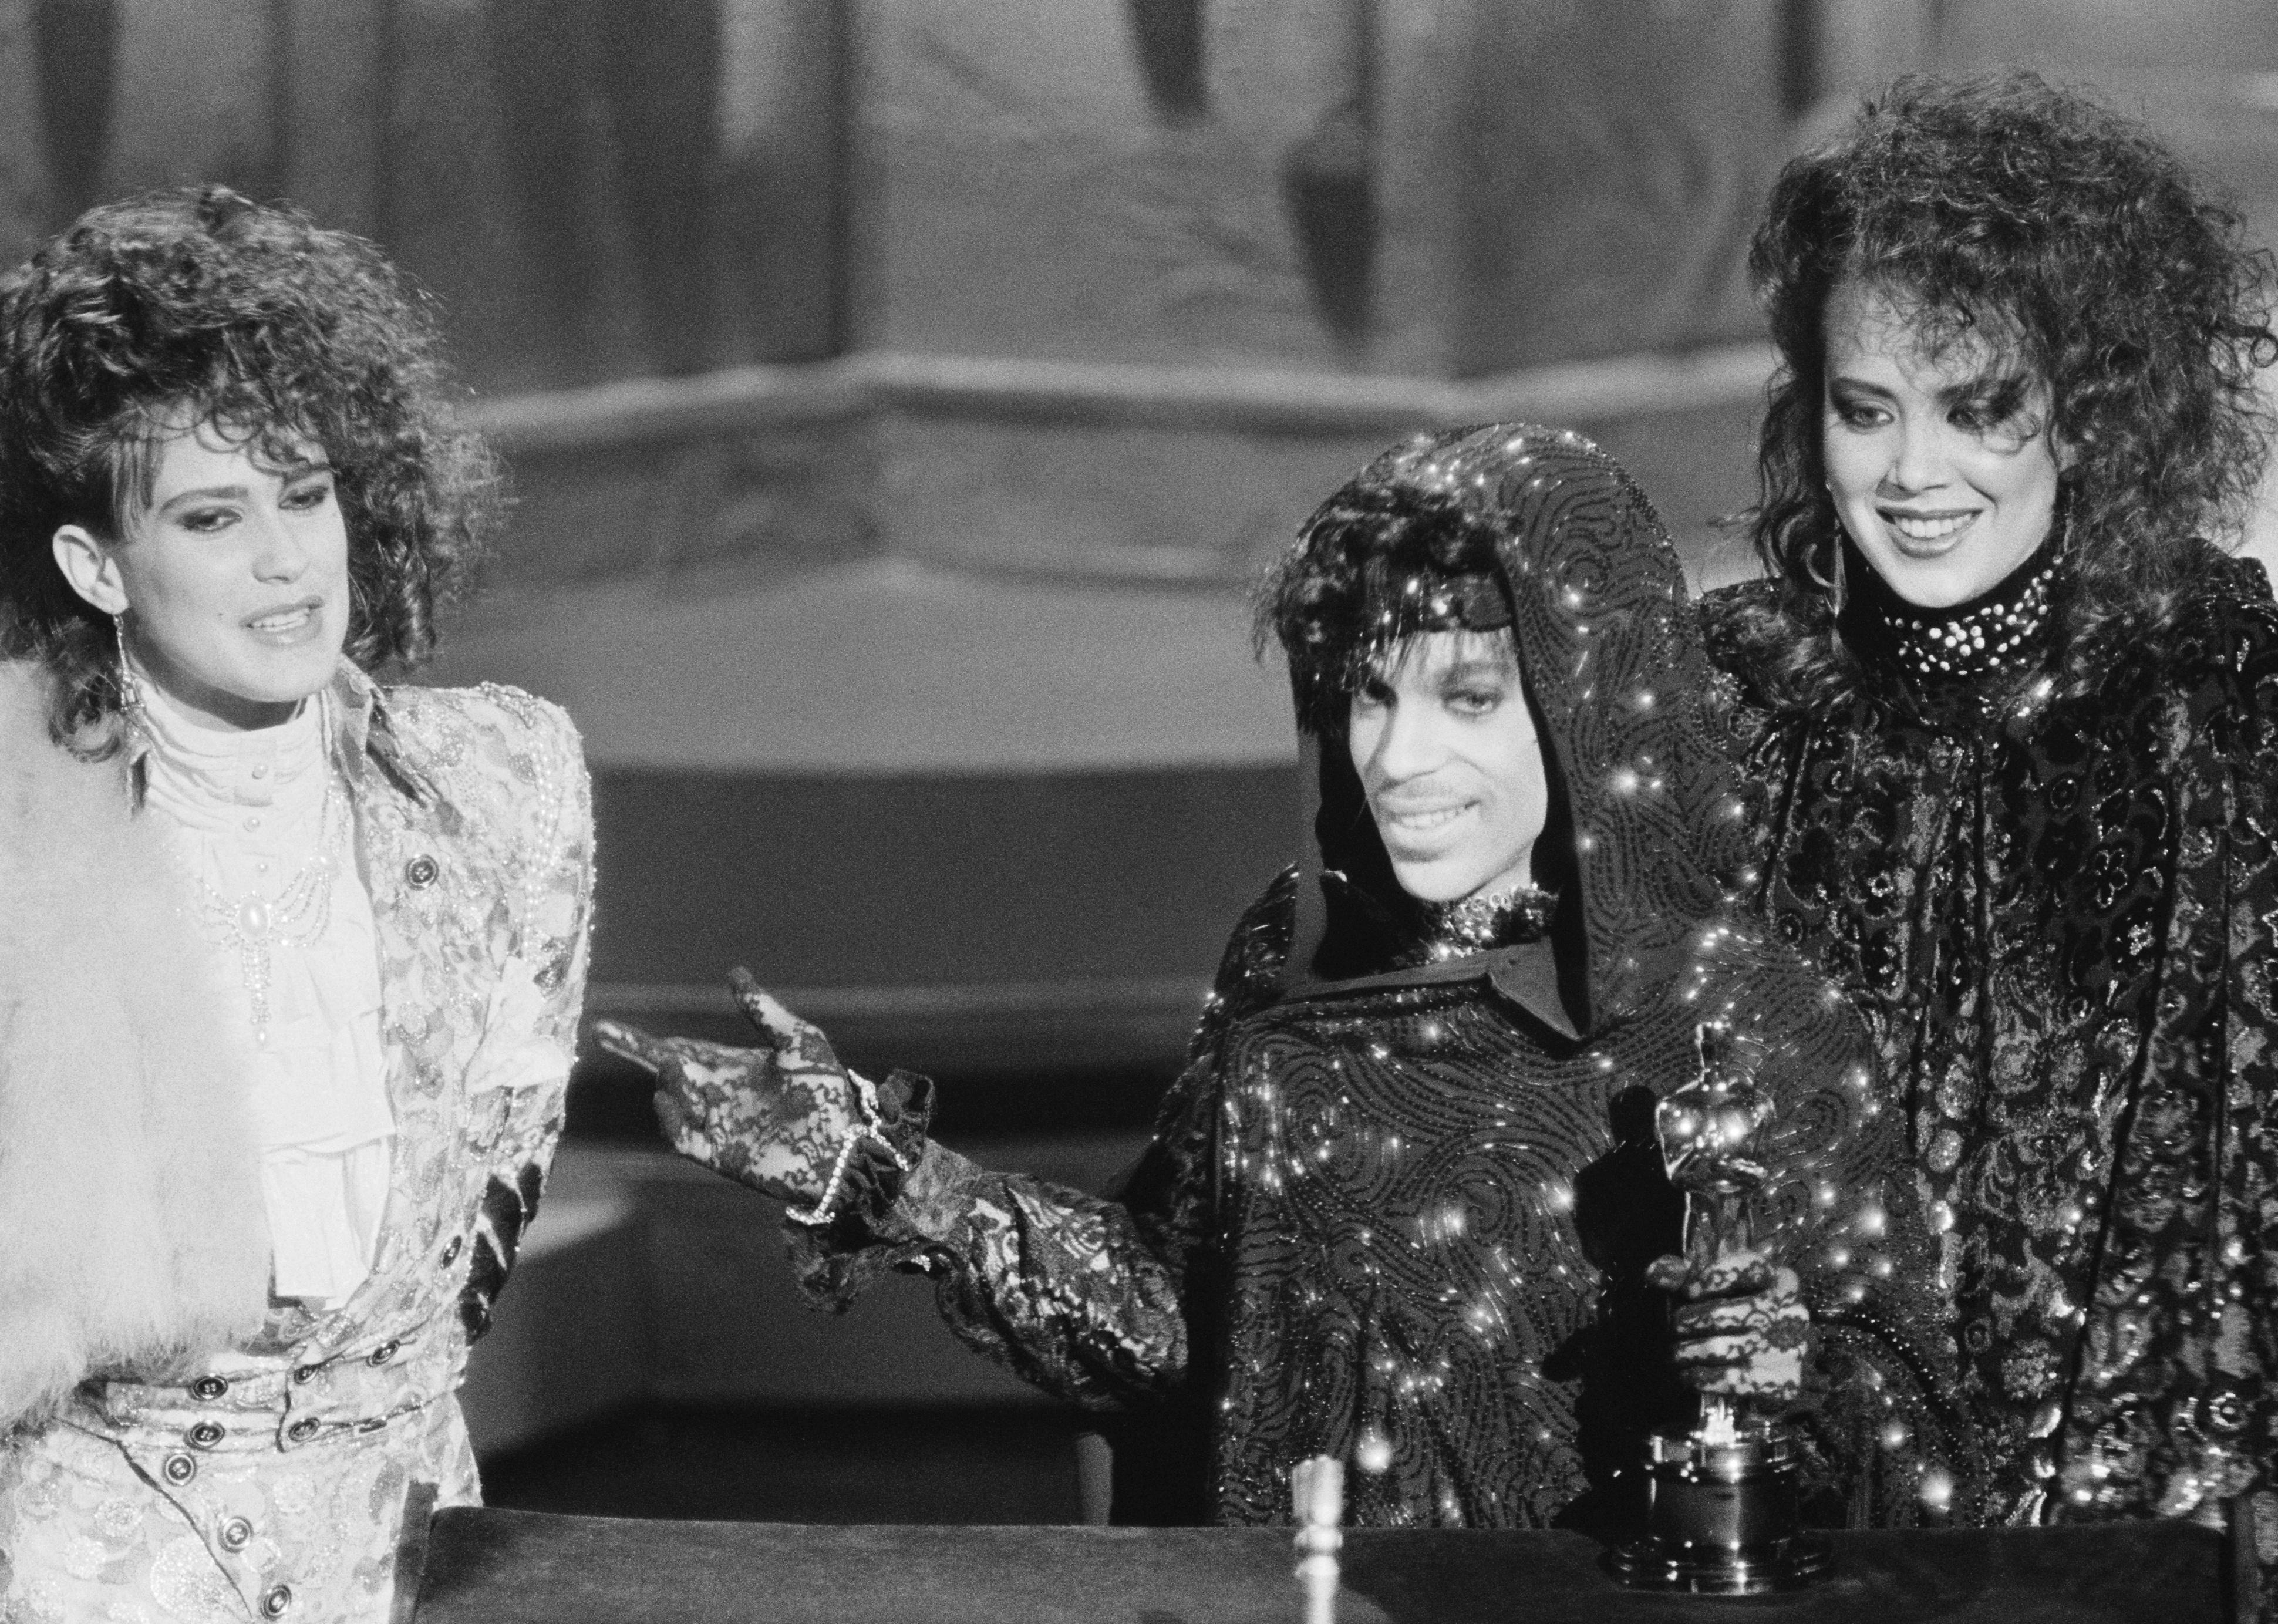 Prince and members of his group accept their Oscar for Best Original Song Score for "Purple Rain."